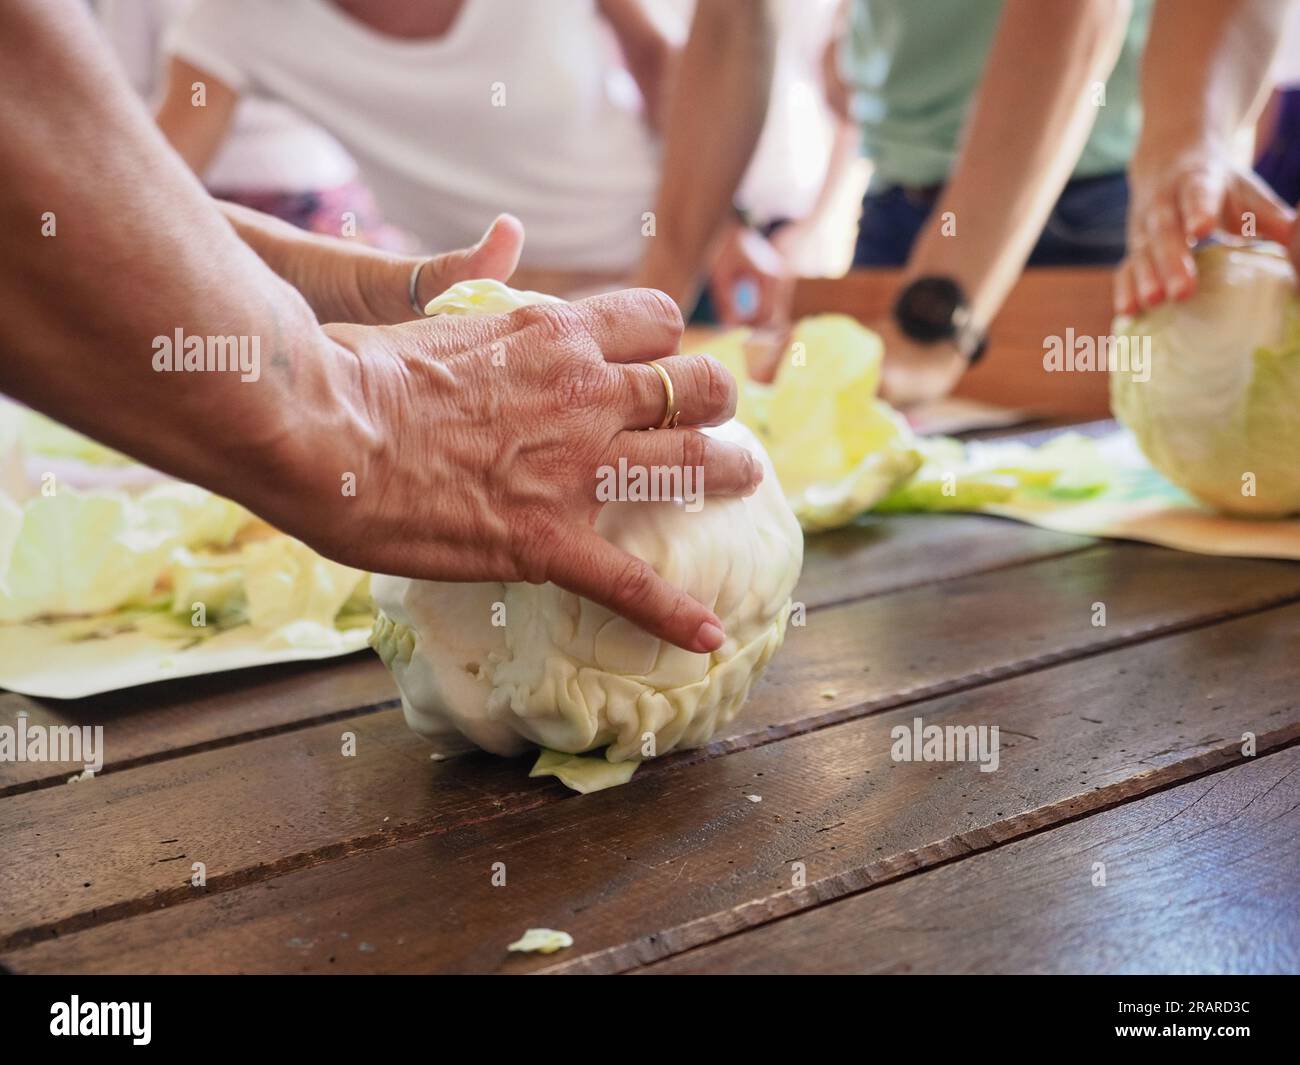 woman cutting and kneading cabbage leaves to make a compress to lower body part inflammation. Natural home made italian antique remedies concept. Stock Photo